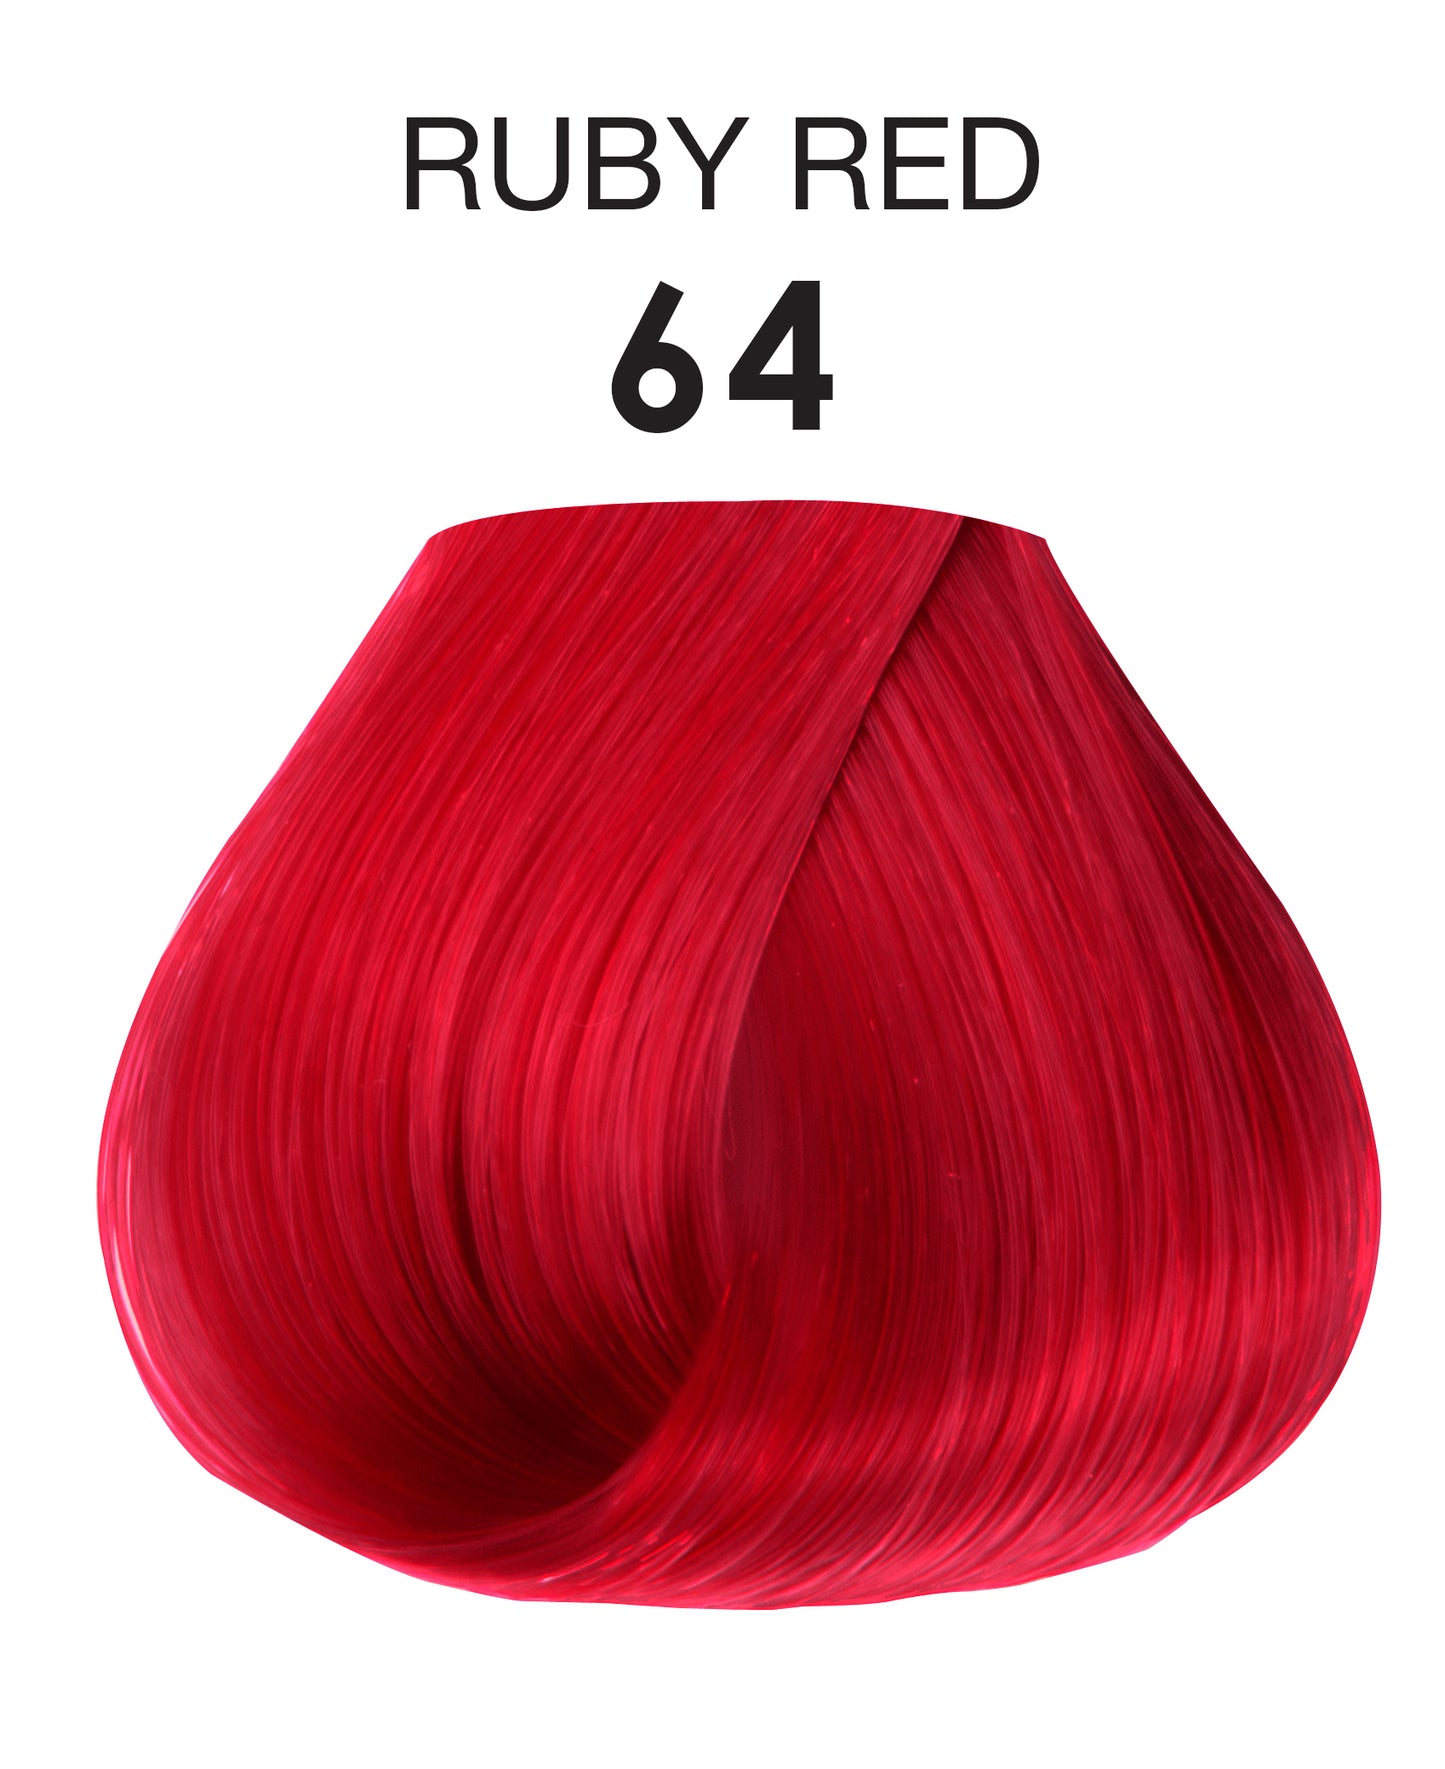 Adore #64 Ruby Red